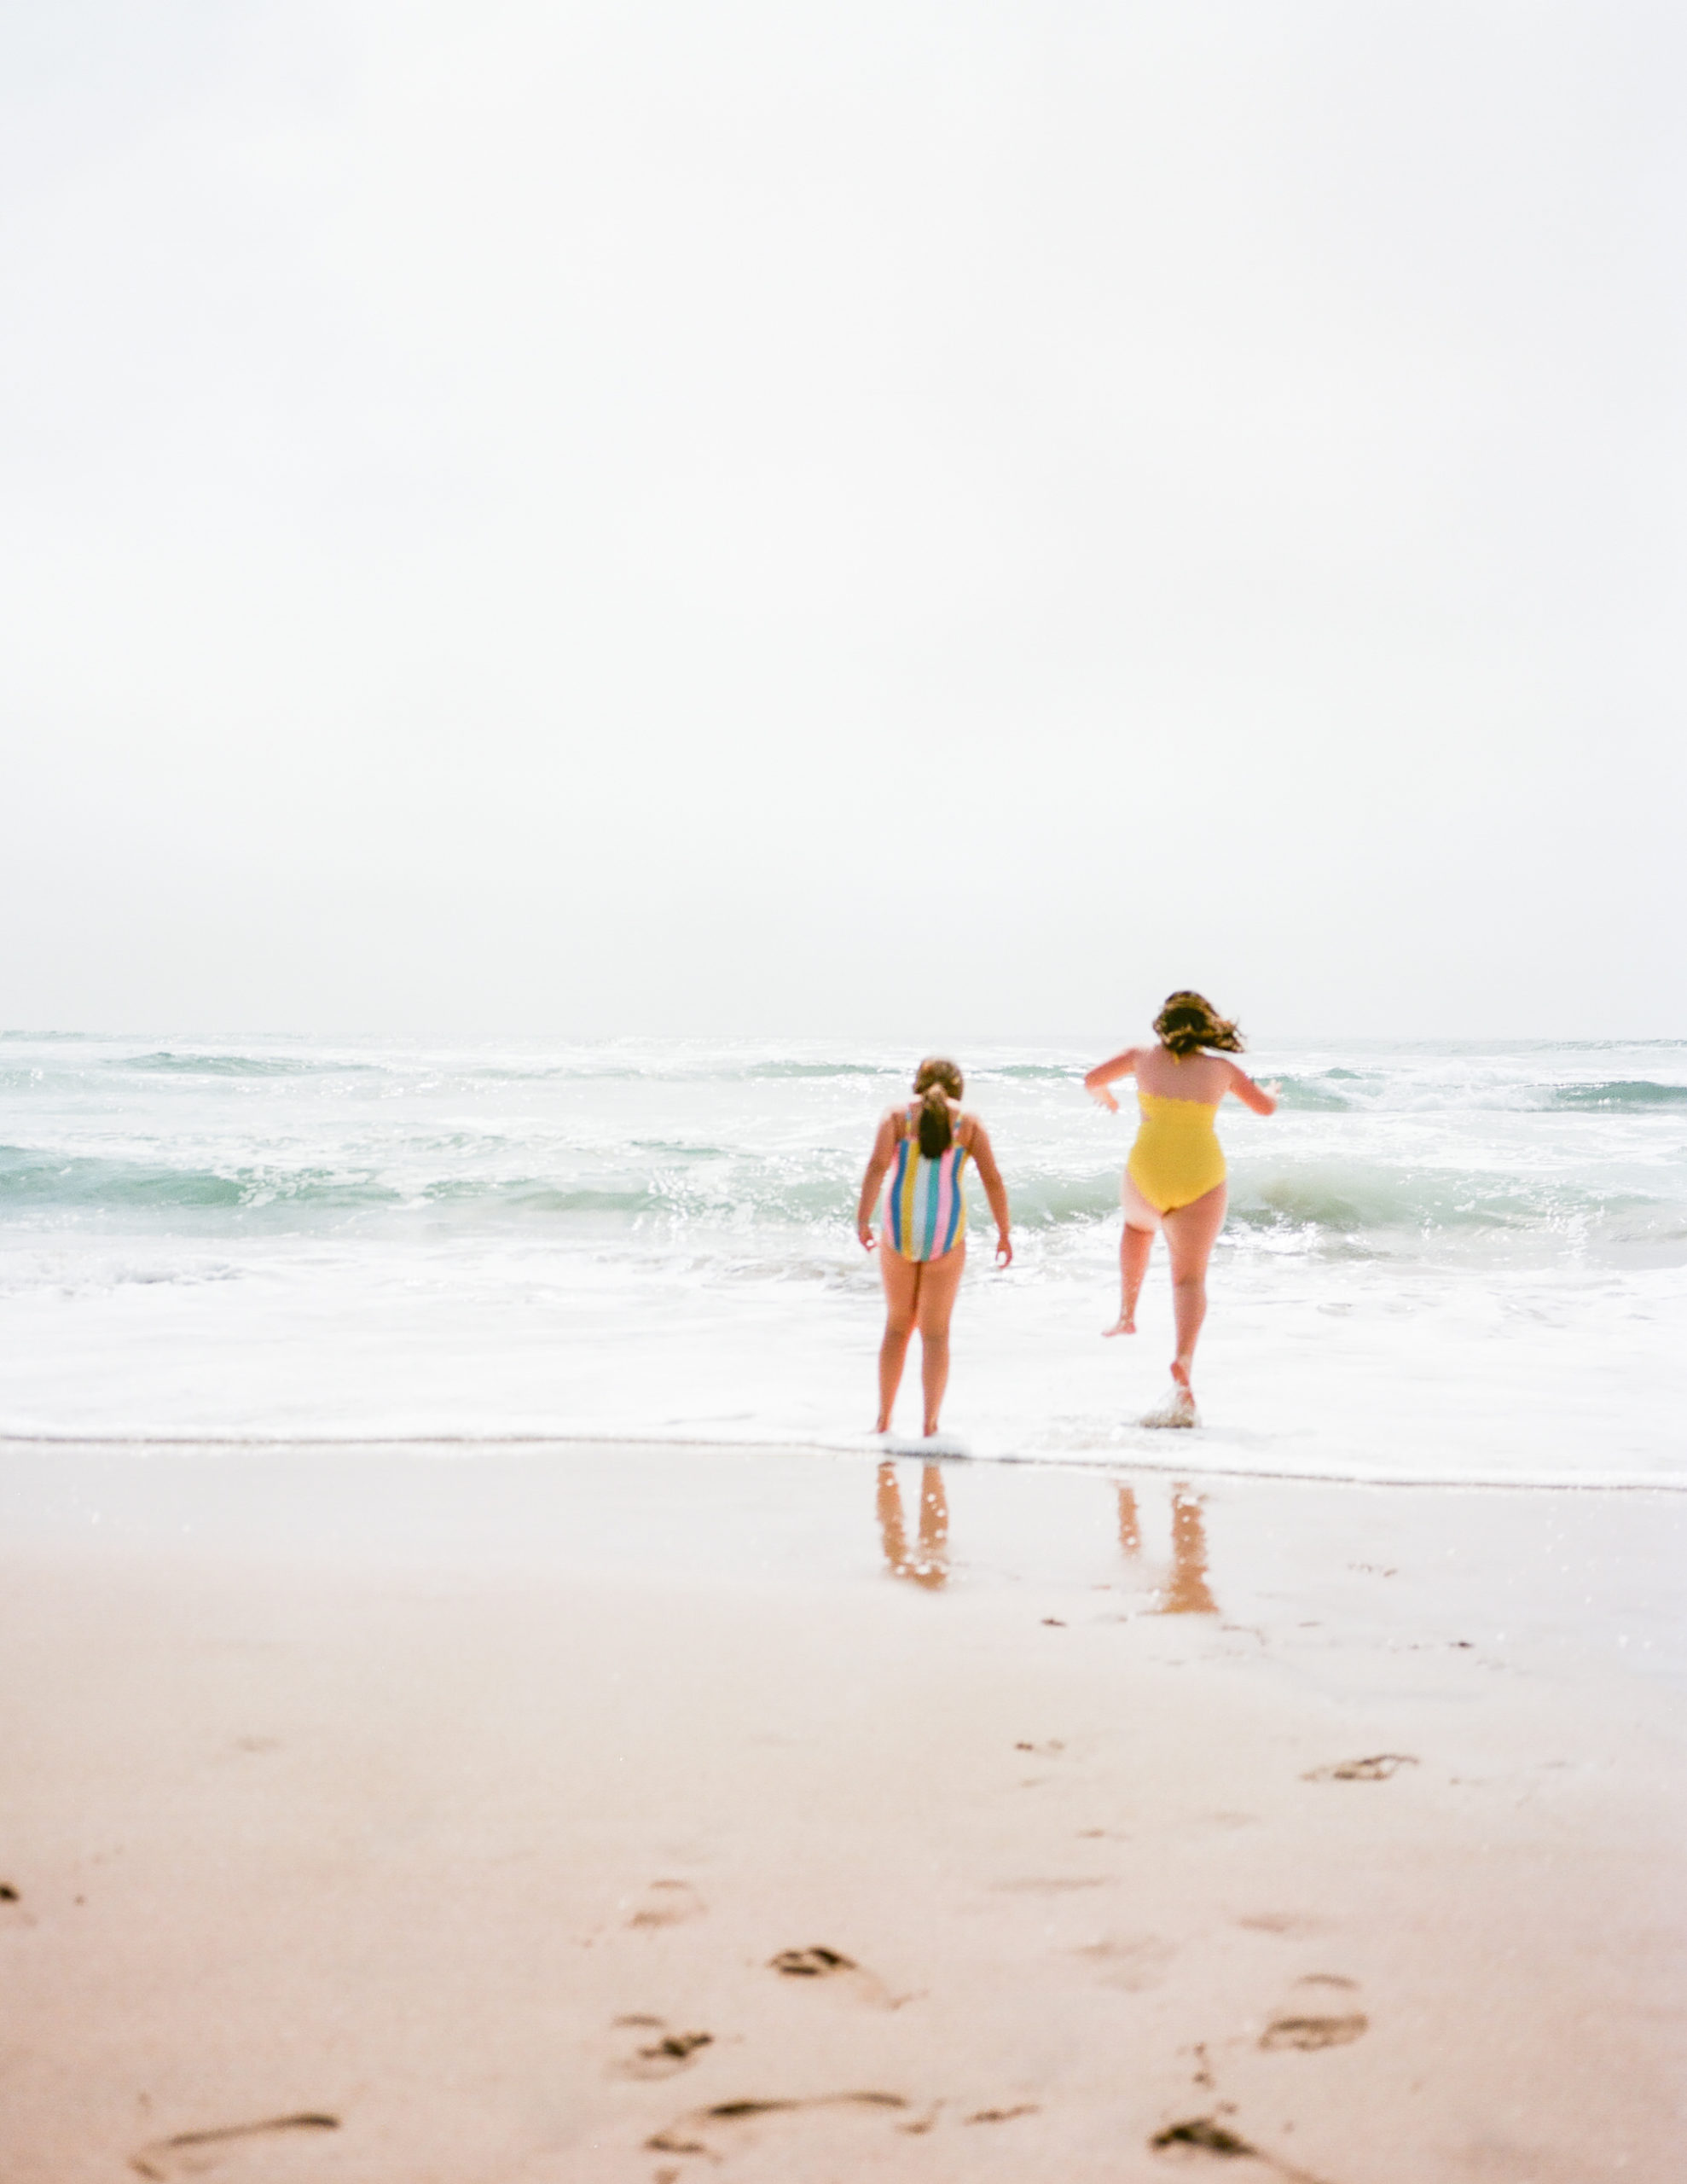 film photo of two girls in bathing suits jumping over waves in ocean